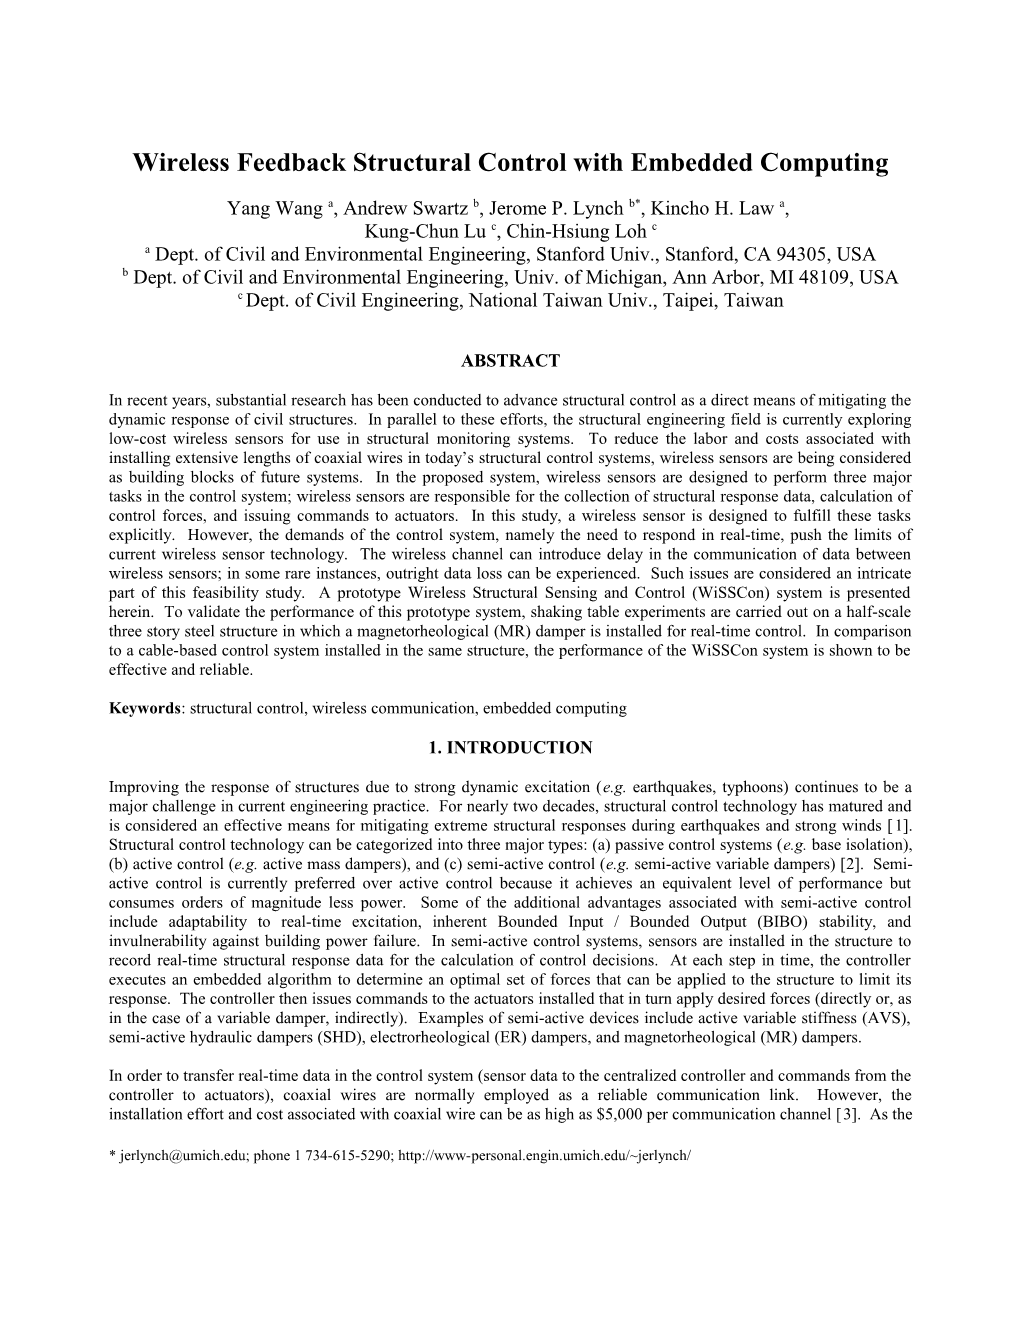 Wireless Feedback Structural Control with Embedded Computing